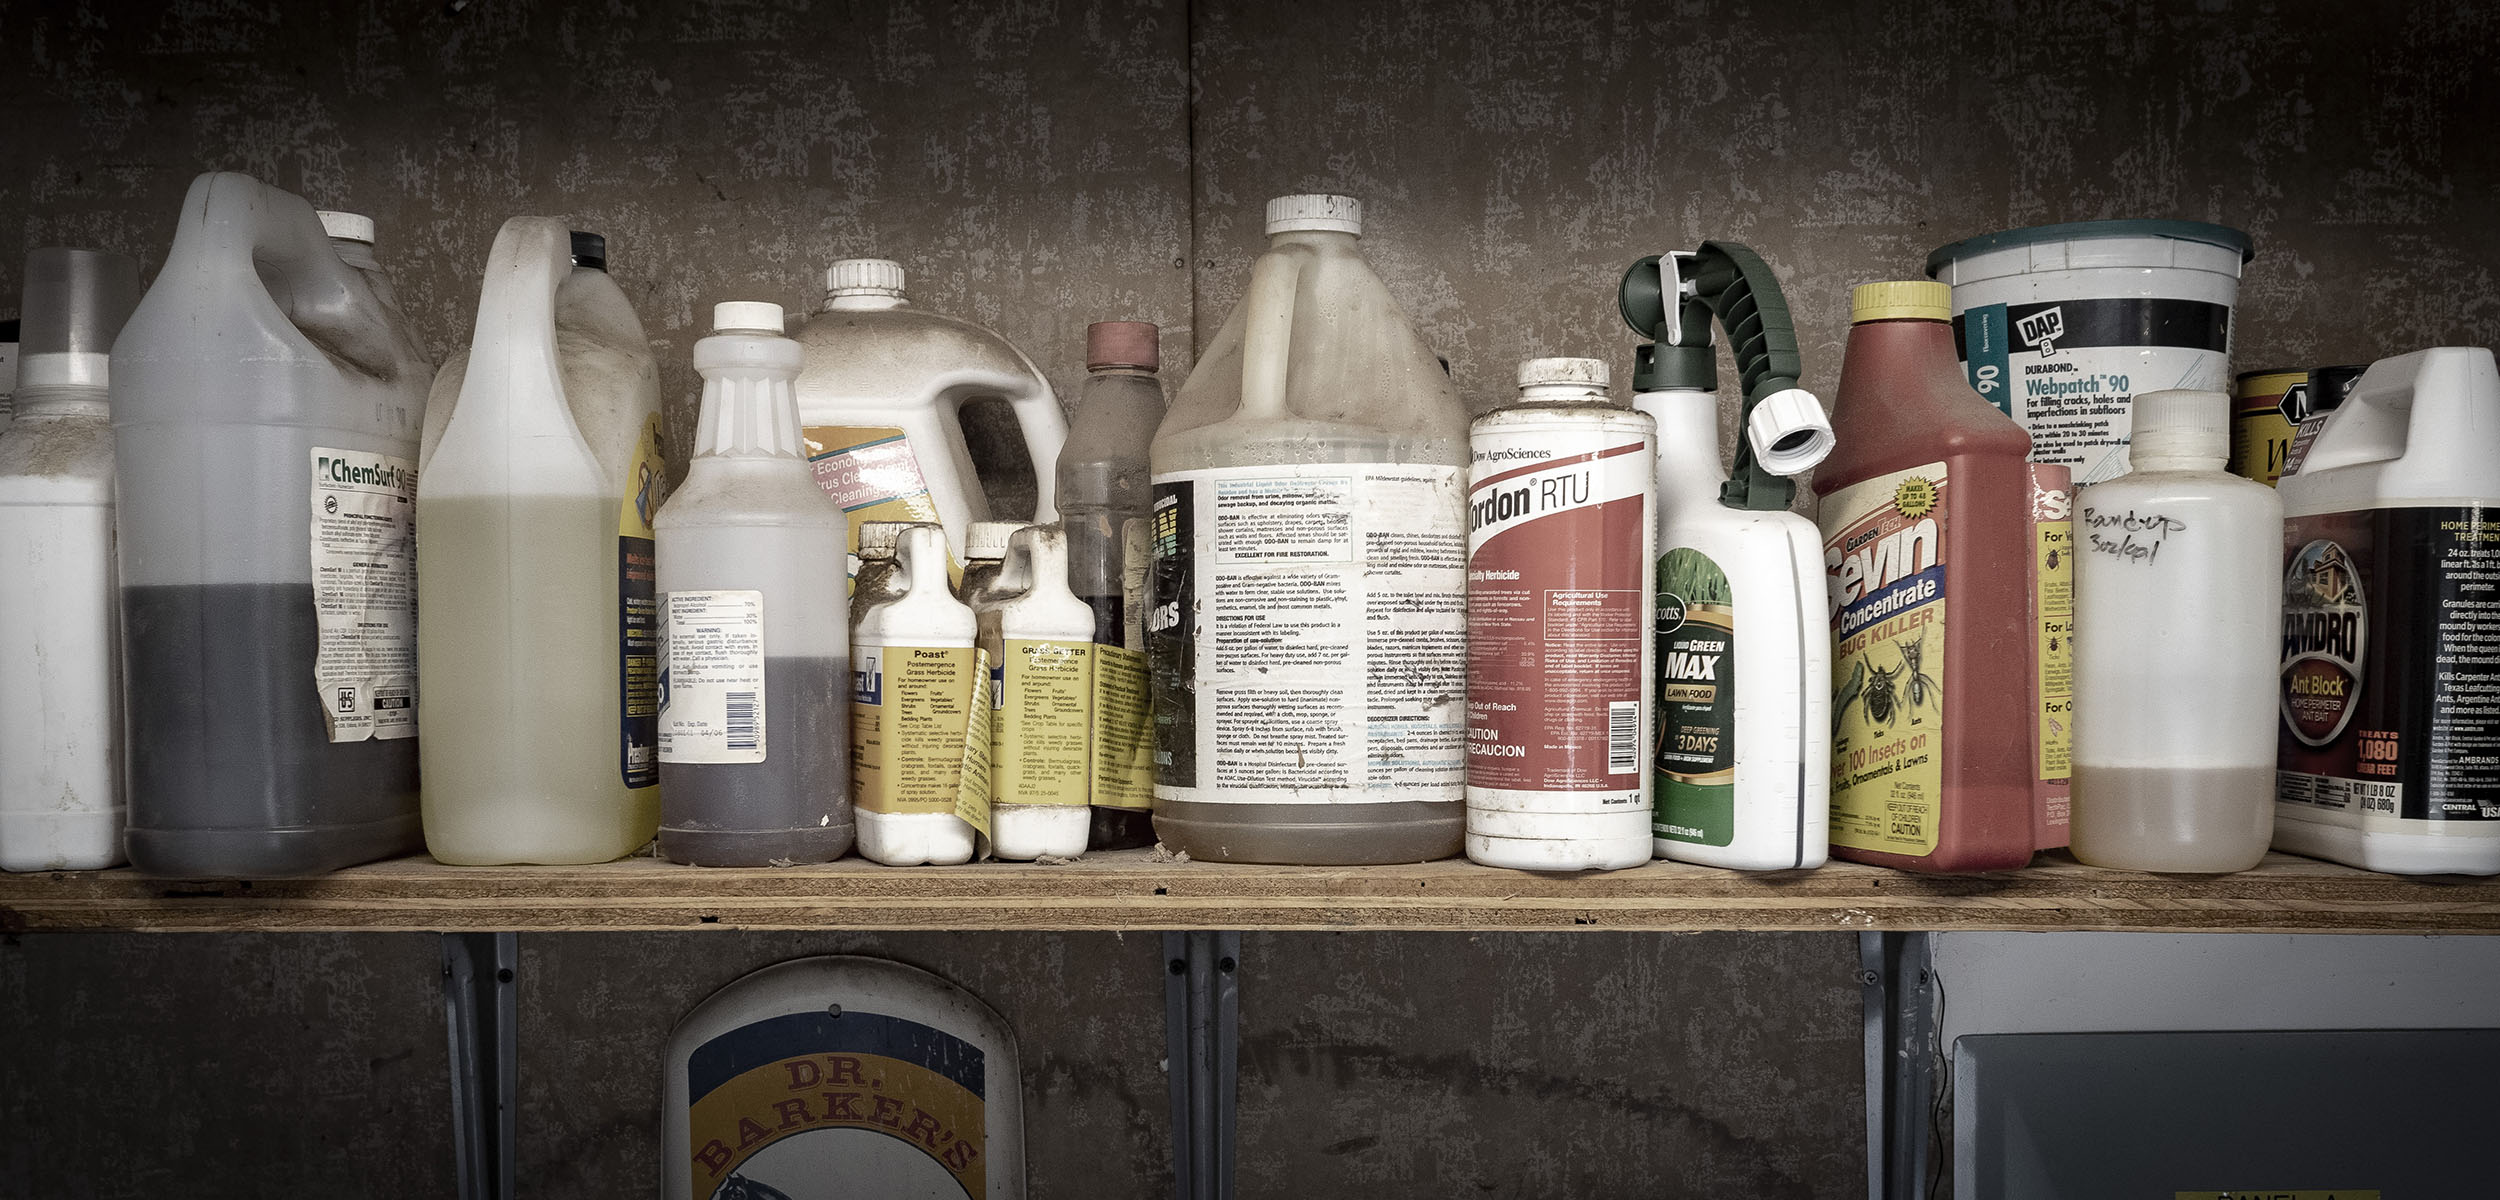 Dusty chemical containers on a shelf.